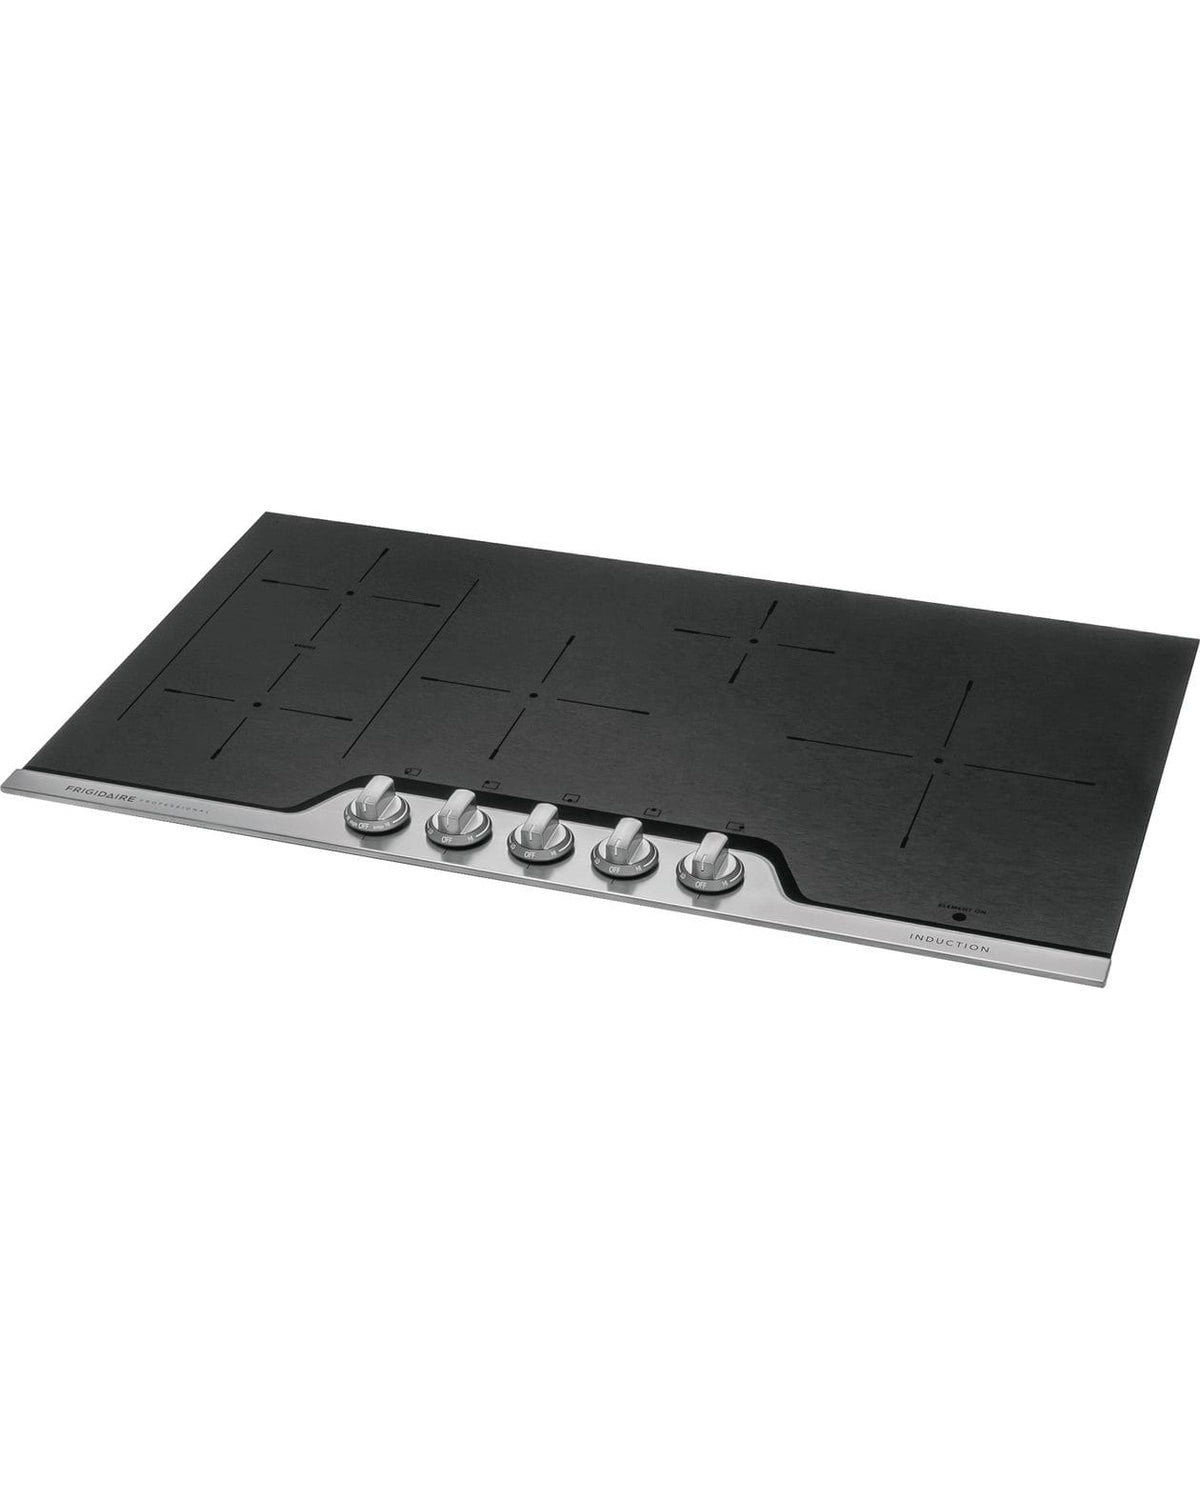 FRIGIDAIRE Professional FPIC3677RF 36&#39;&#39; Induction Cooktop